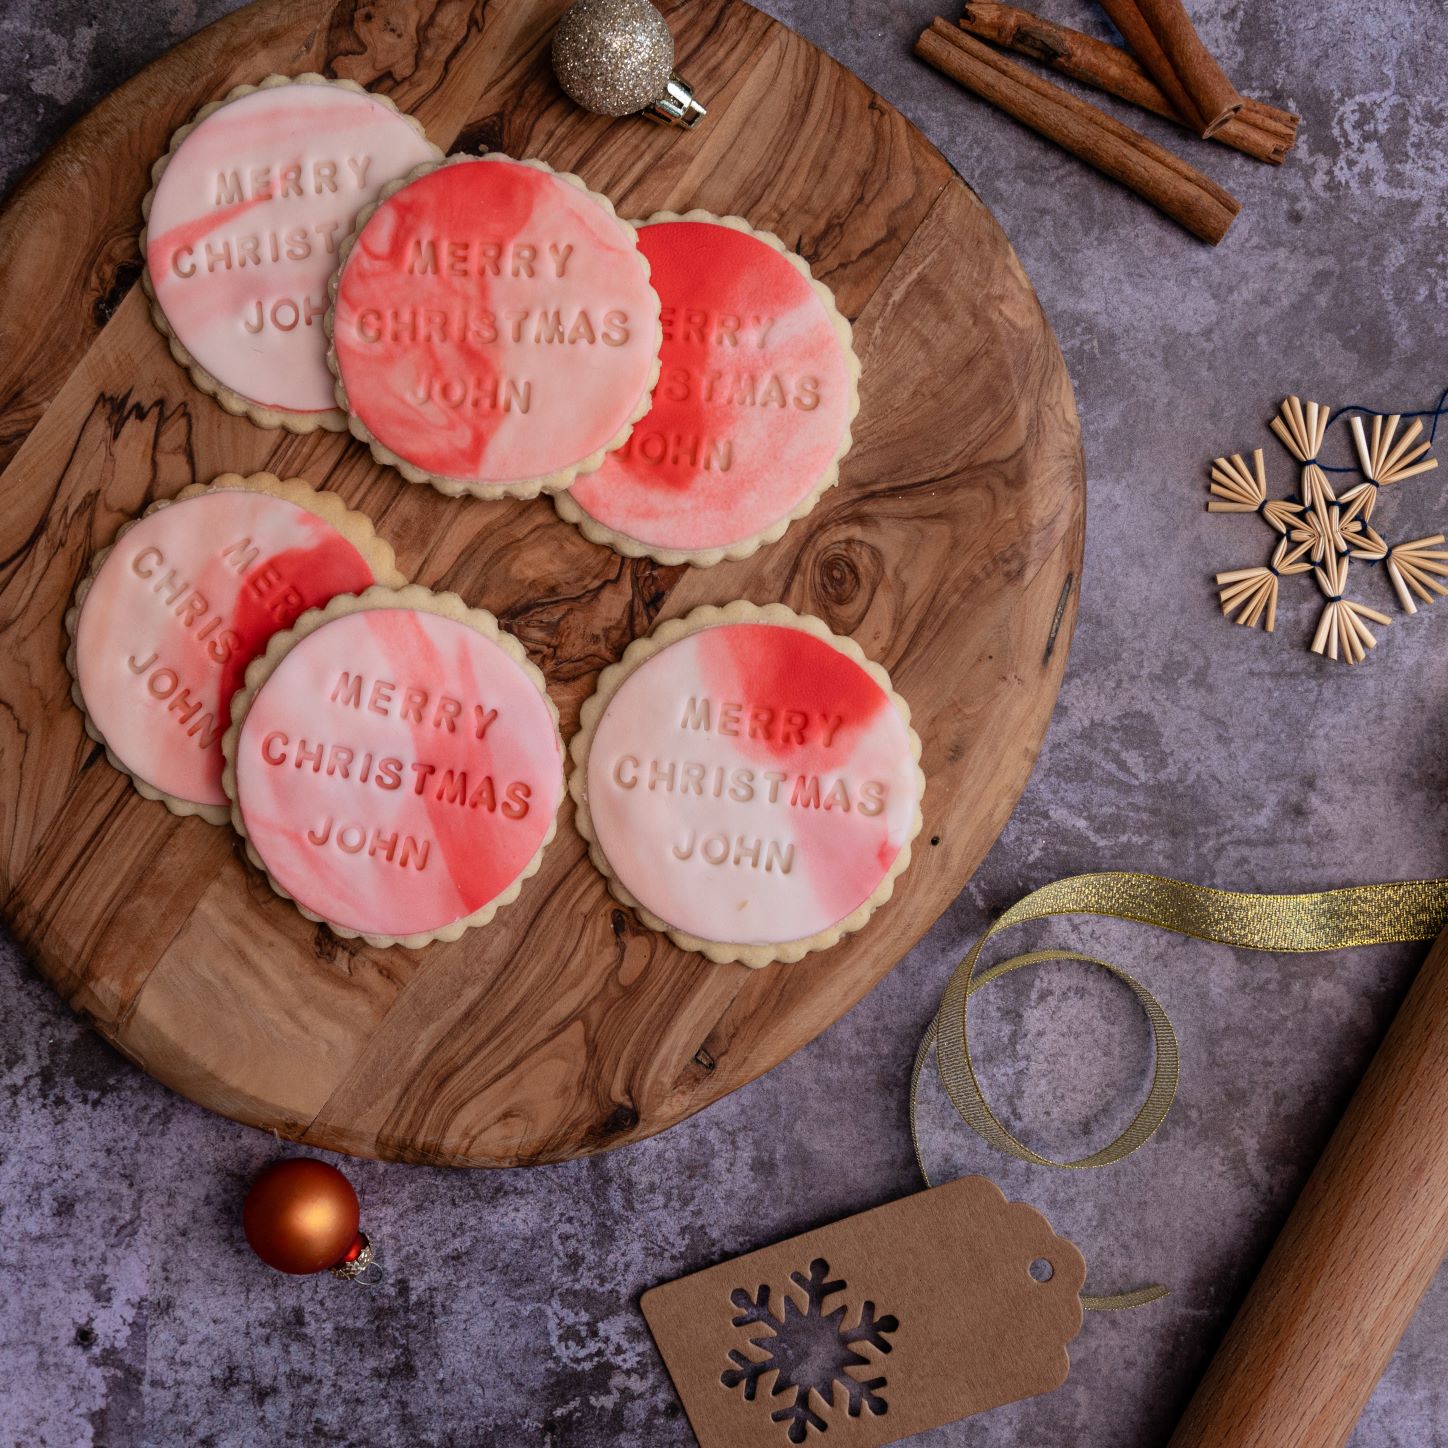 Personalised Iced Christmas biscuits by bloom bakers